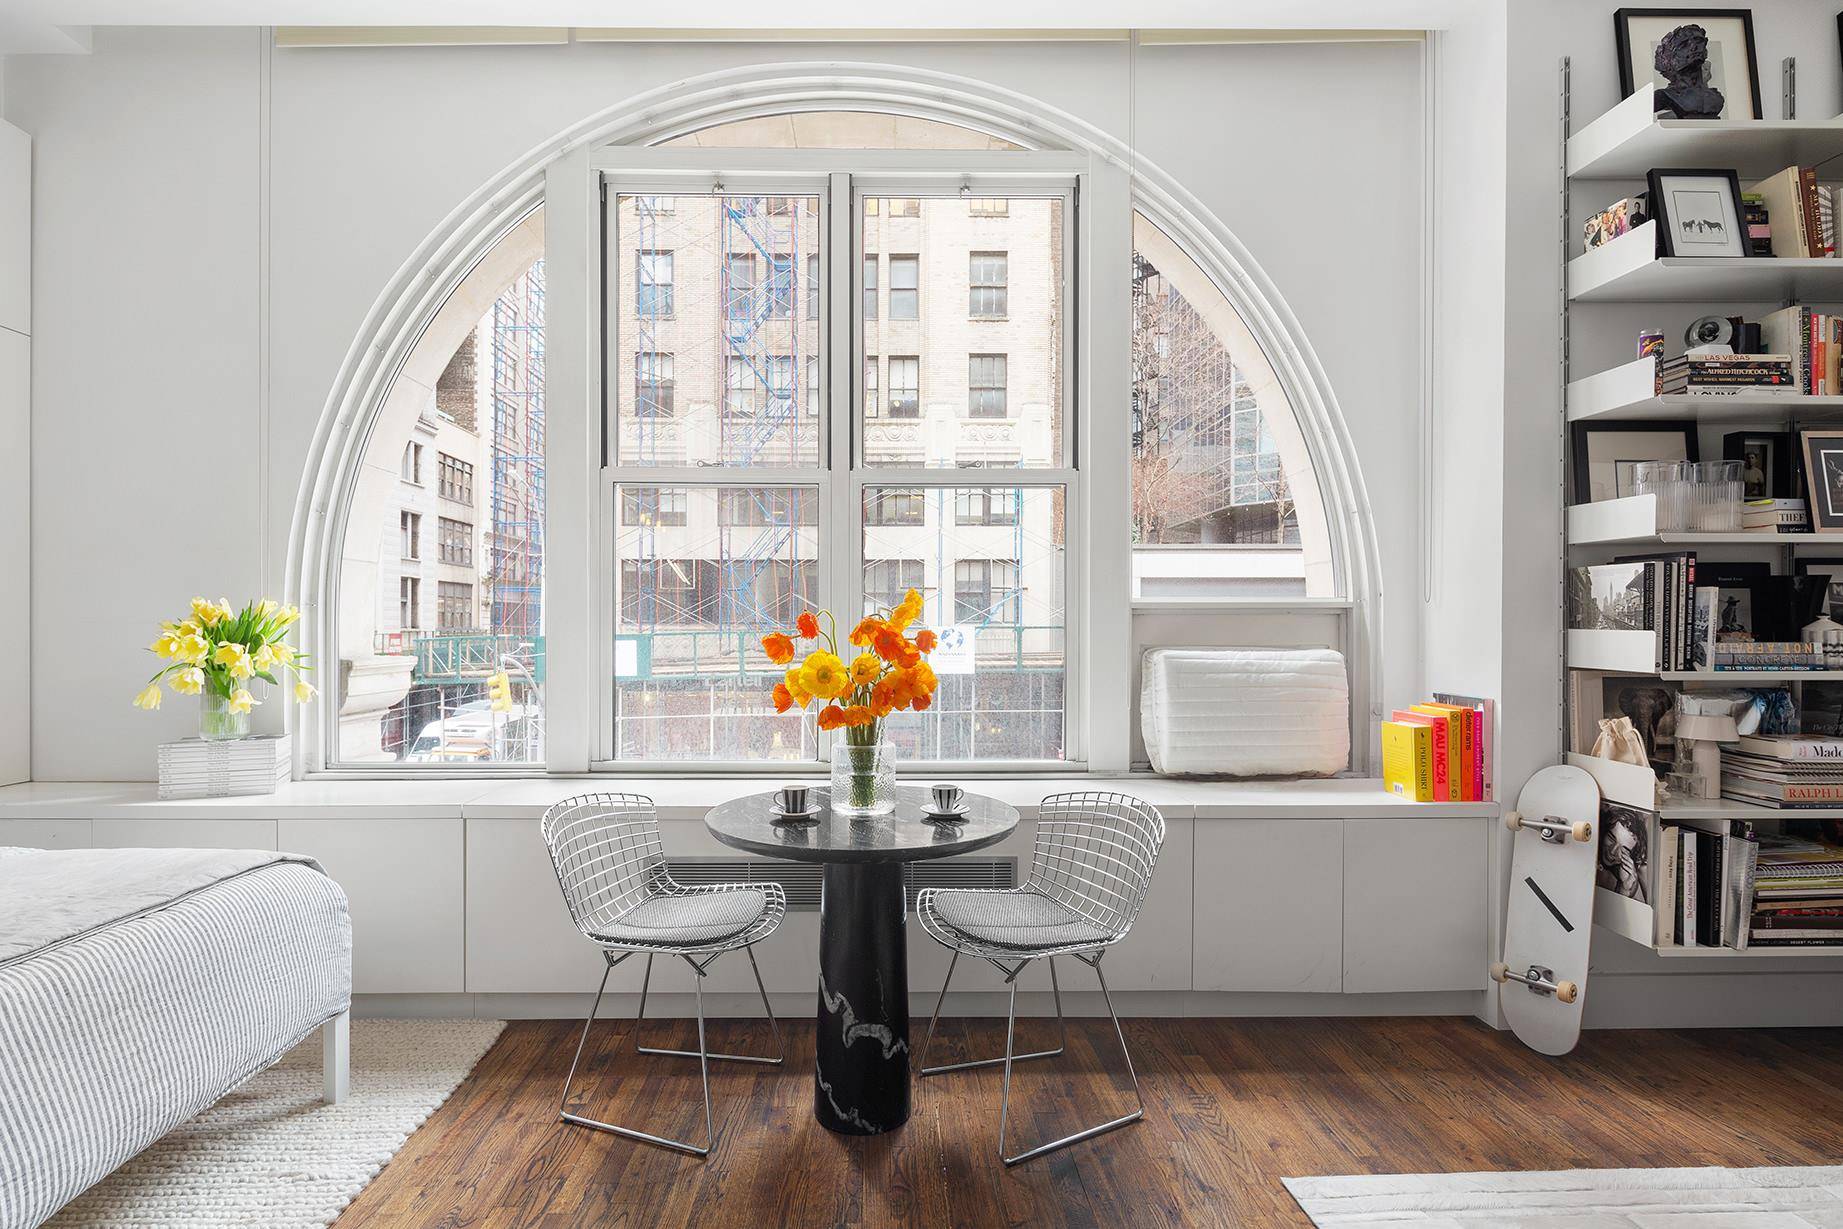 Meticulously crafted to perfection, 2H at 159 Madison Avenue is a stunning loft style, junior one bedroom turned studio that has undergone a transformative renovation.